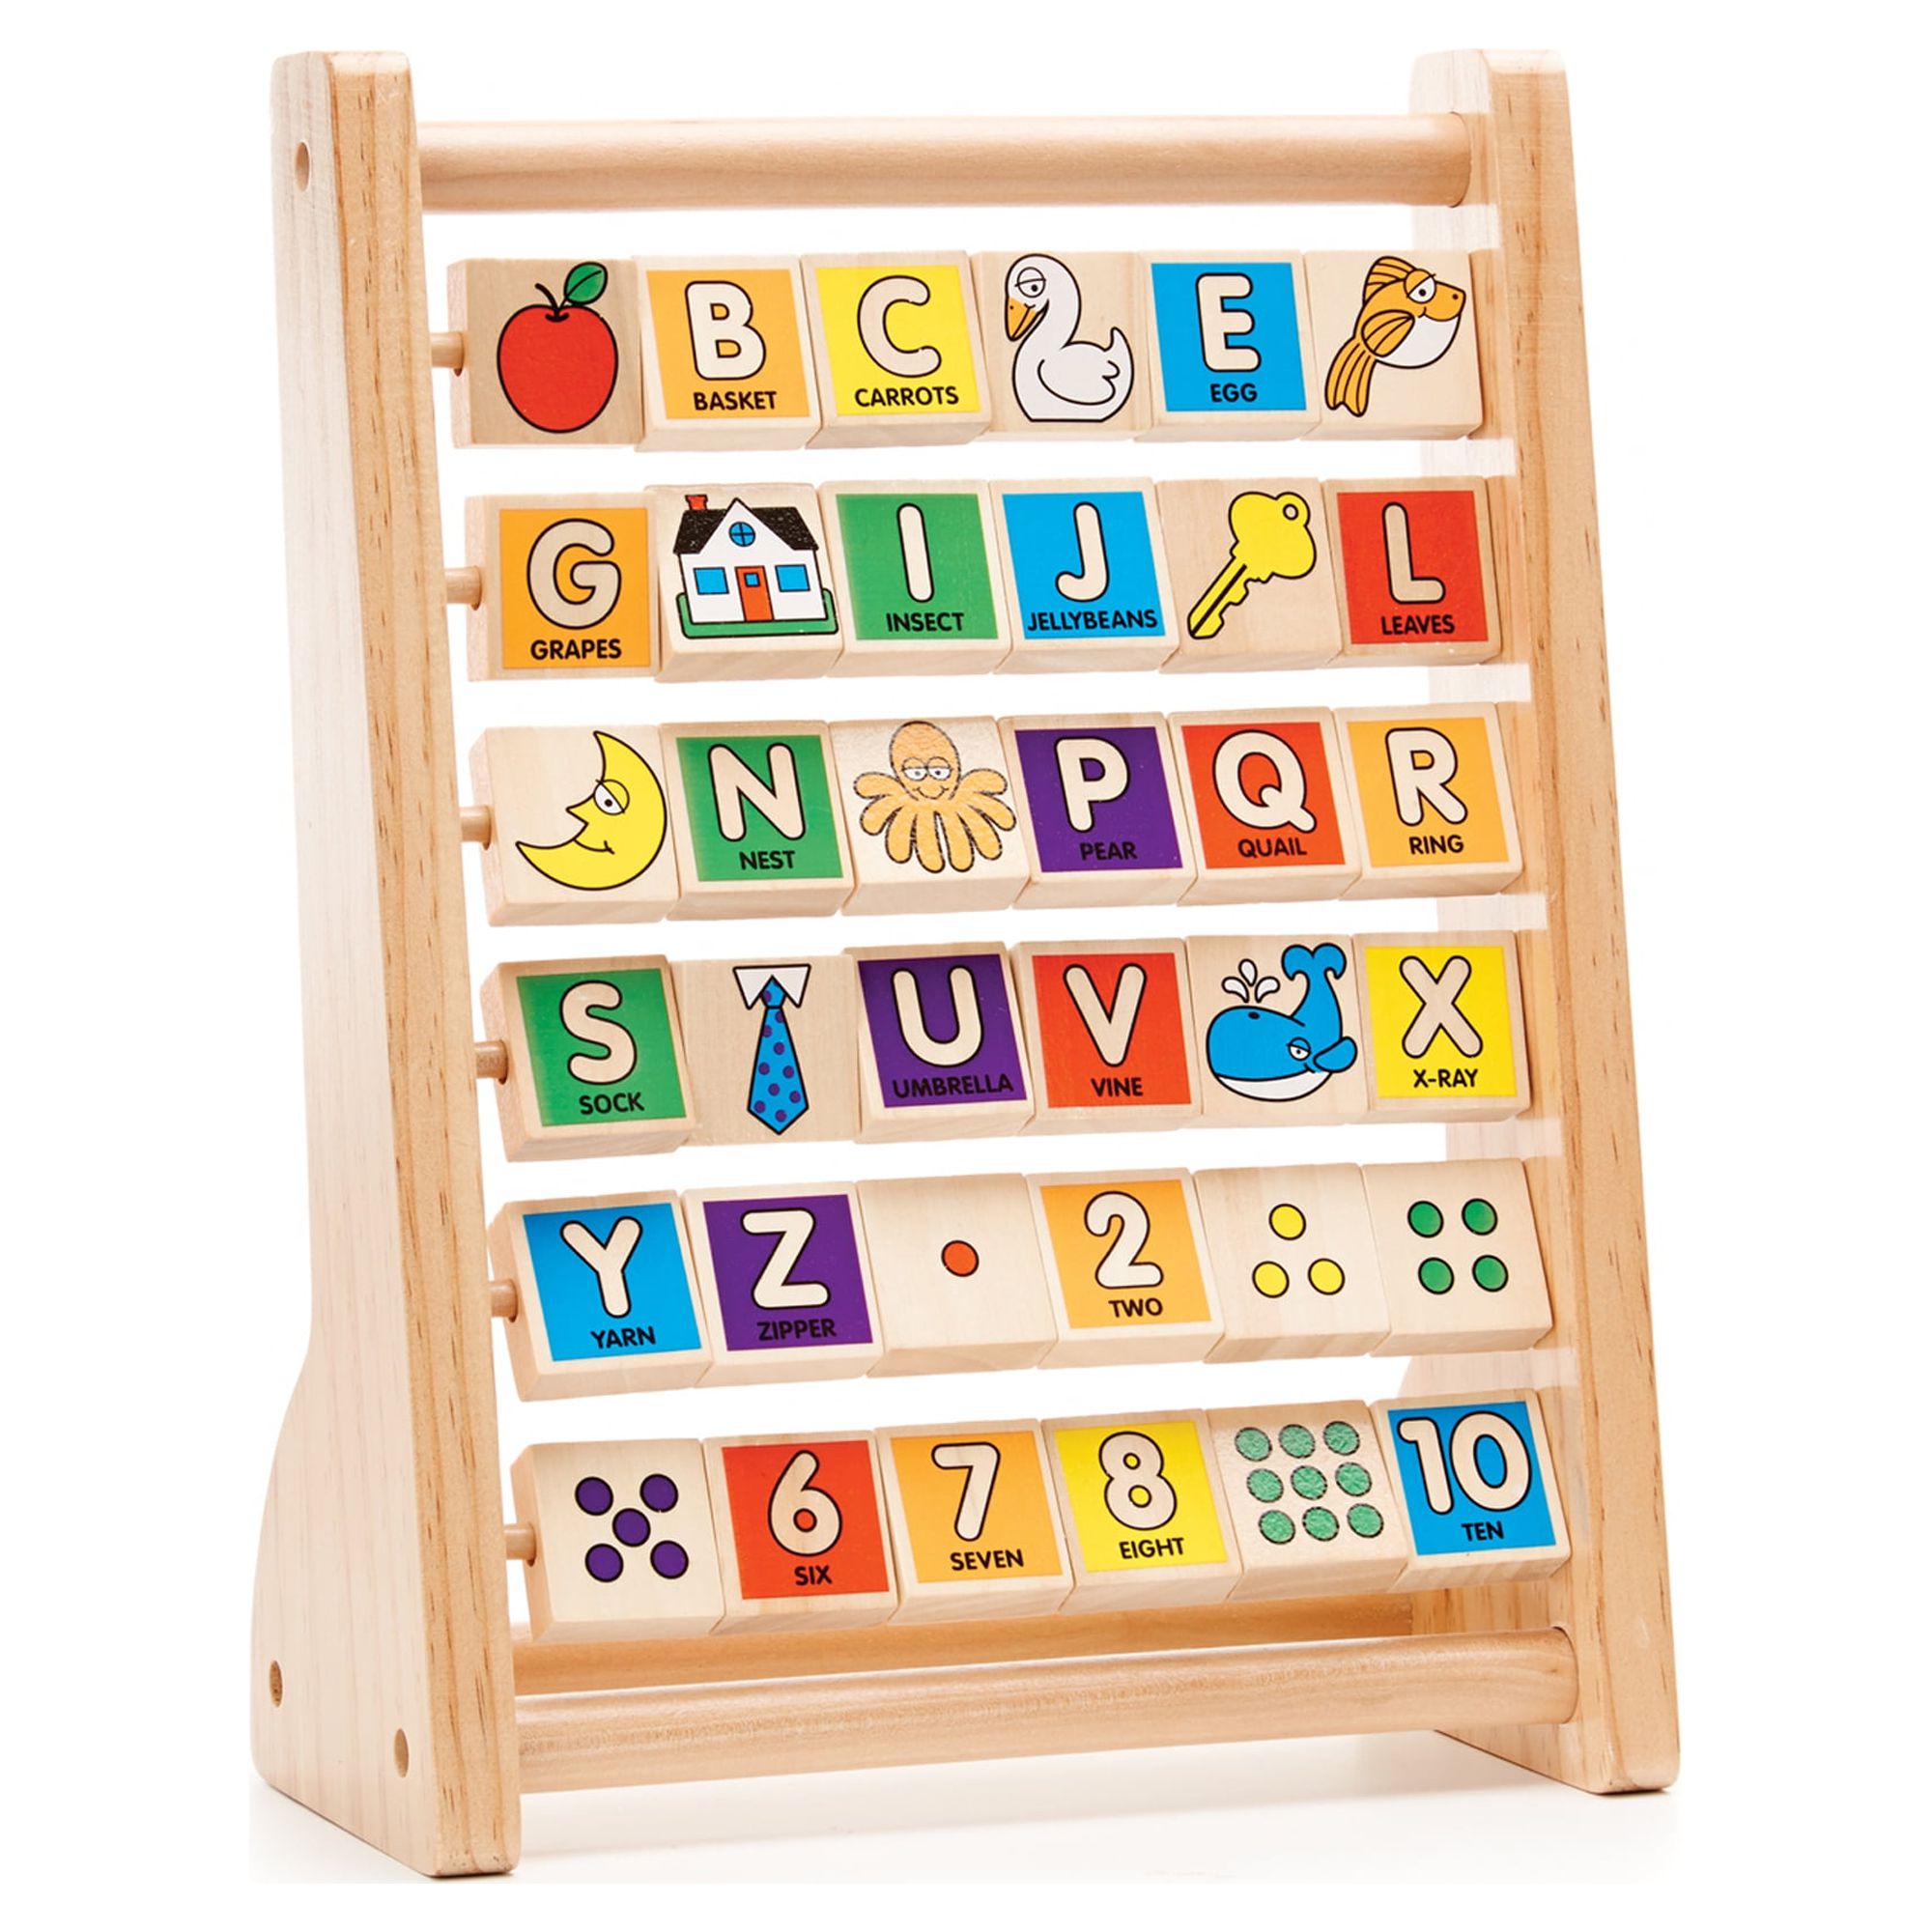 Melissa & Doug ABC-123 Abacus - Classic Wooden Educational Toy With 36 Letter and Number Tiles - image 1 of 9